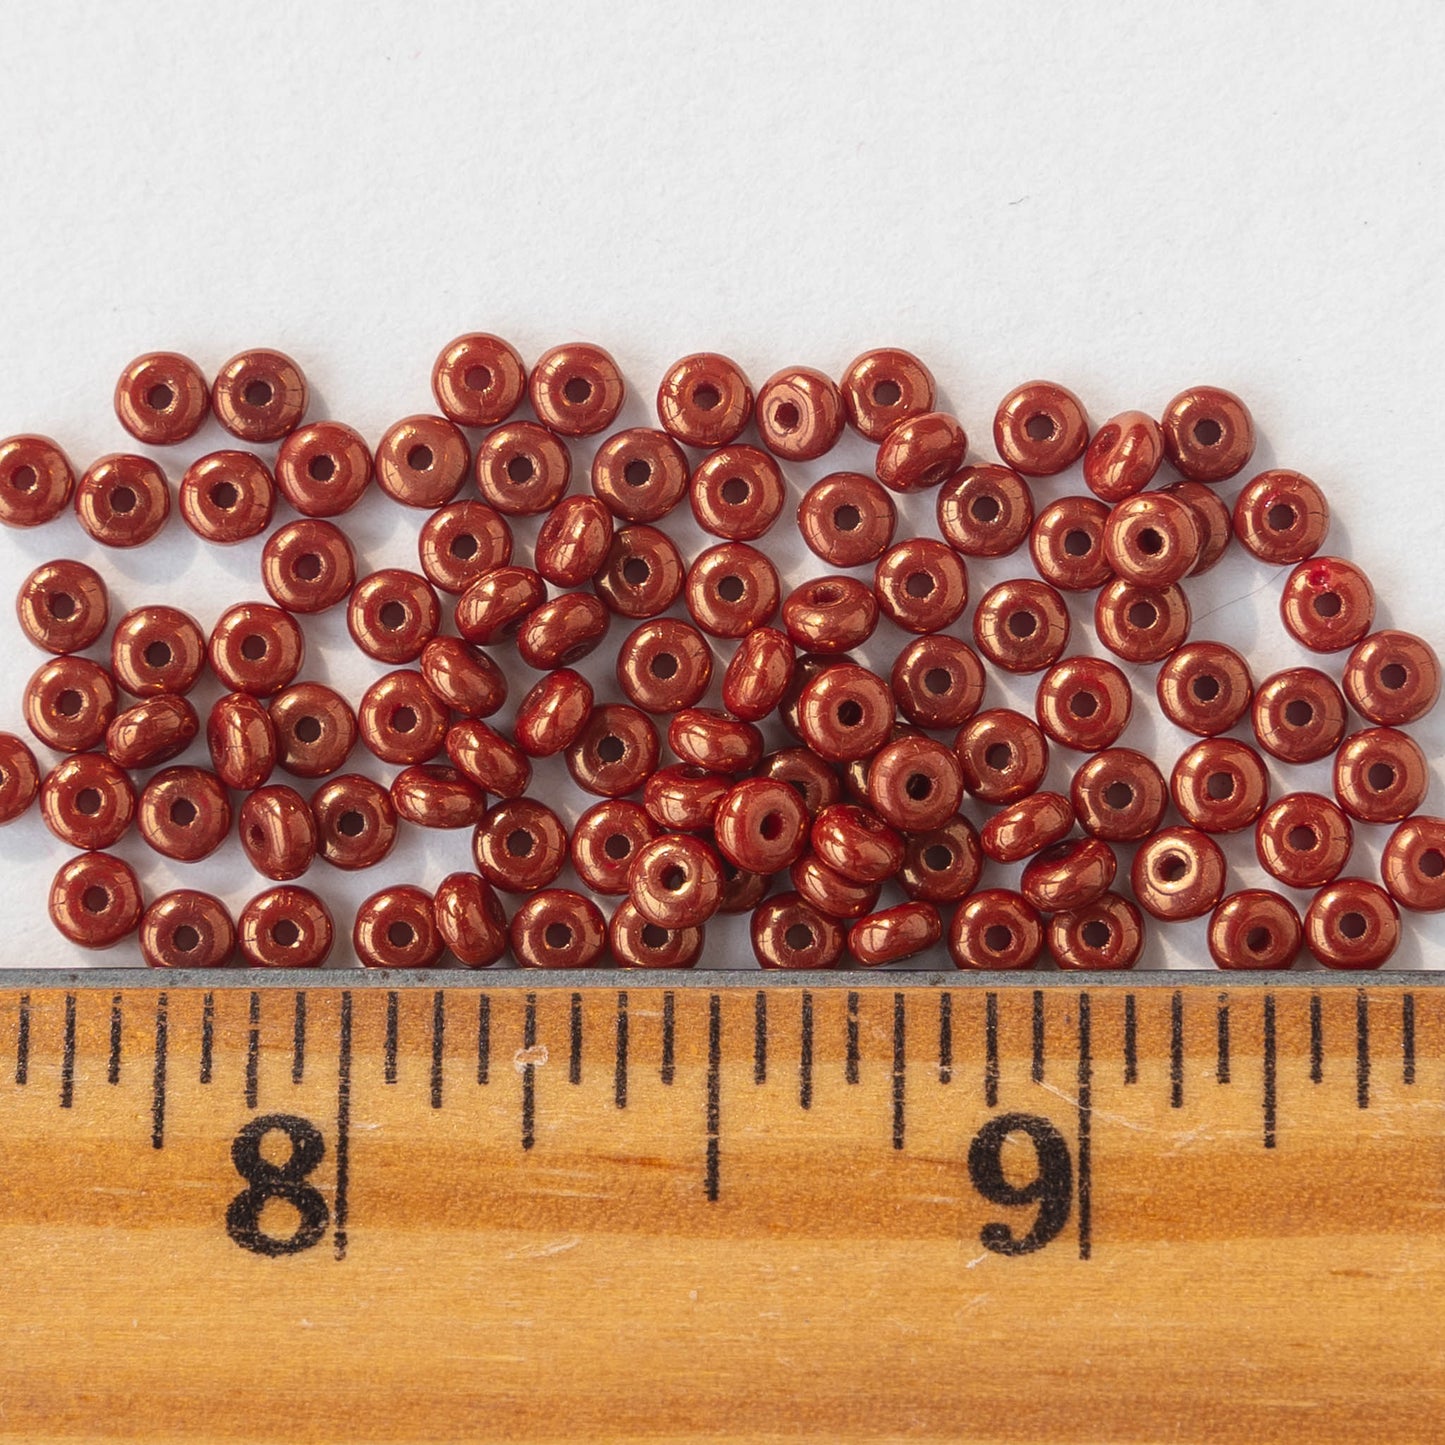 3mm Rondelle Beads - Red with Gold Luster - 100 Beads